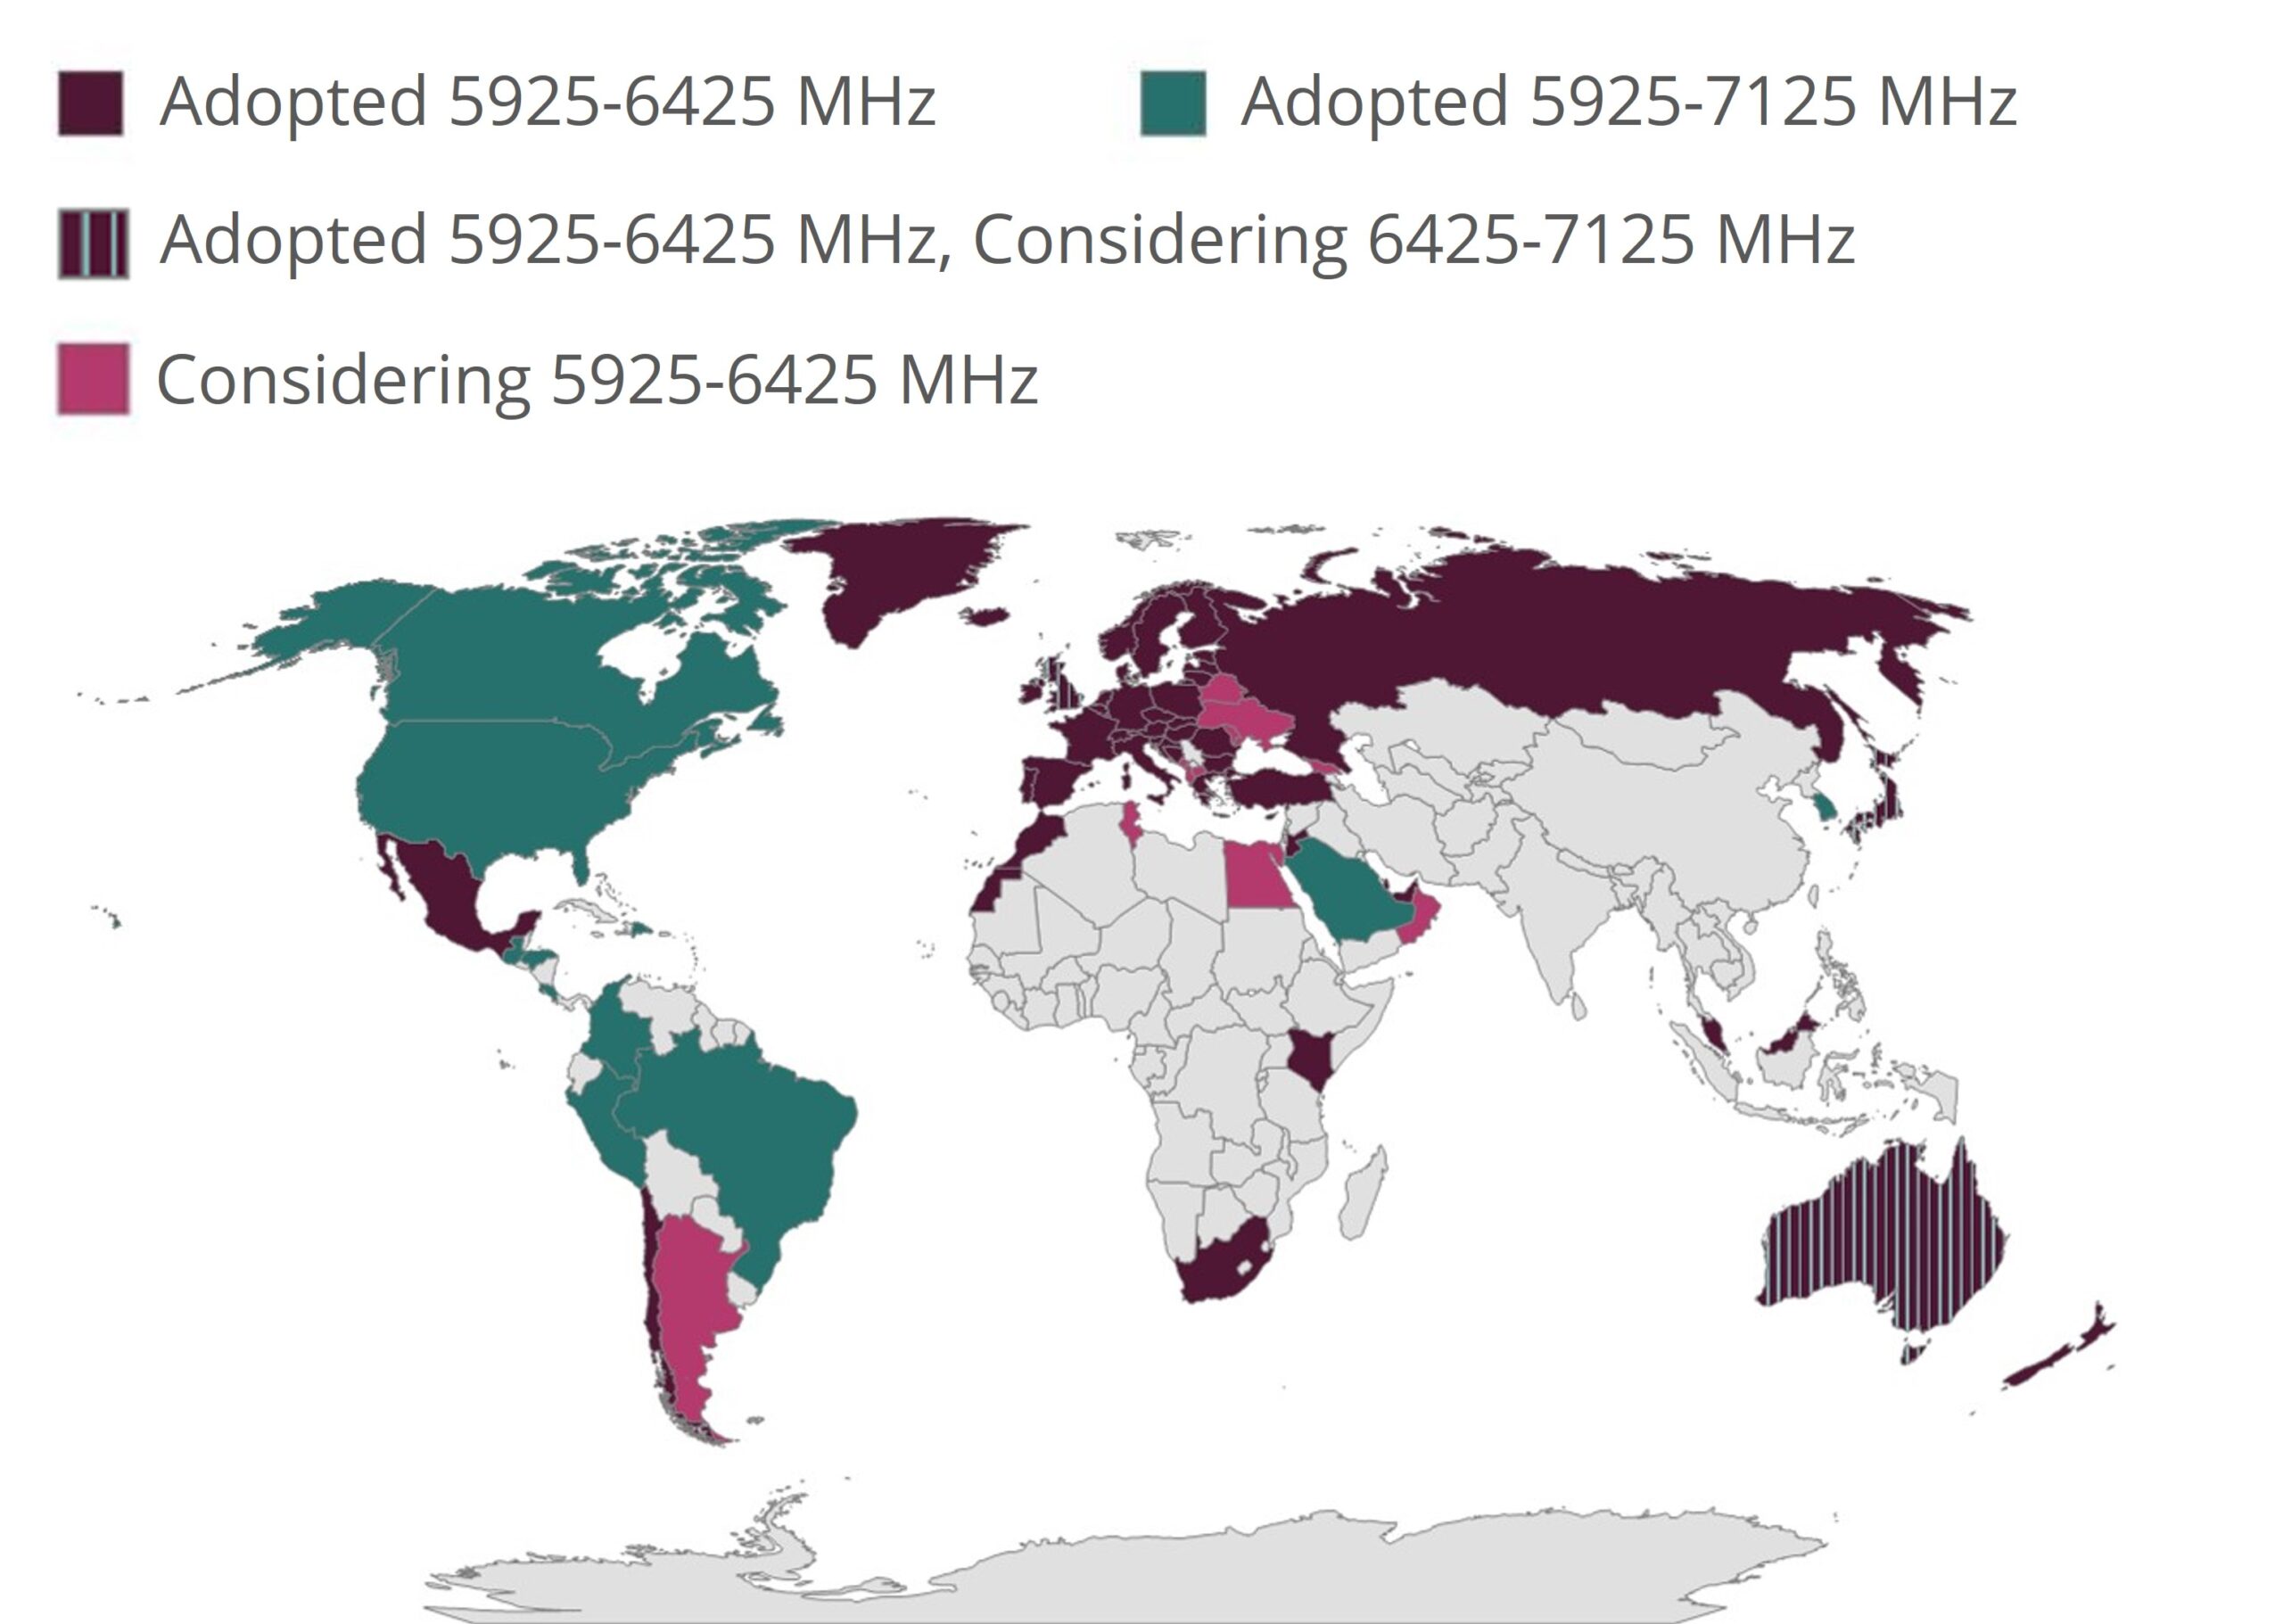 Countries enabling Wi-Fi in 6GHz